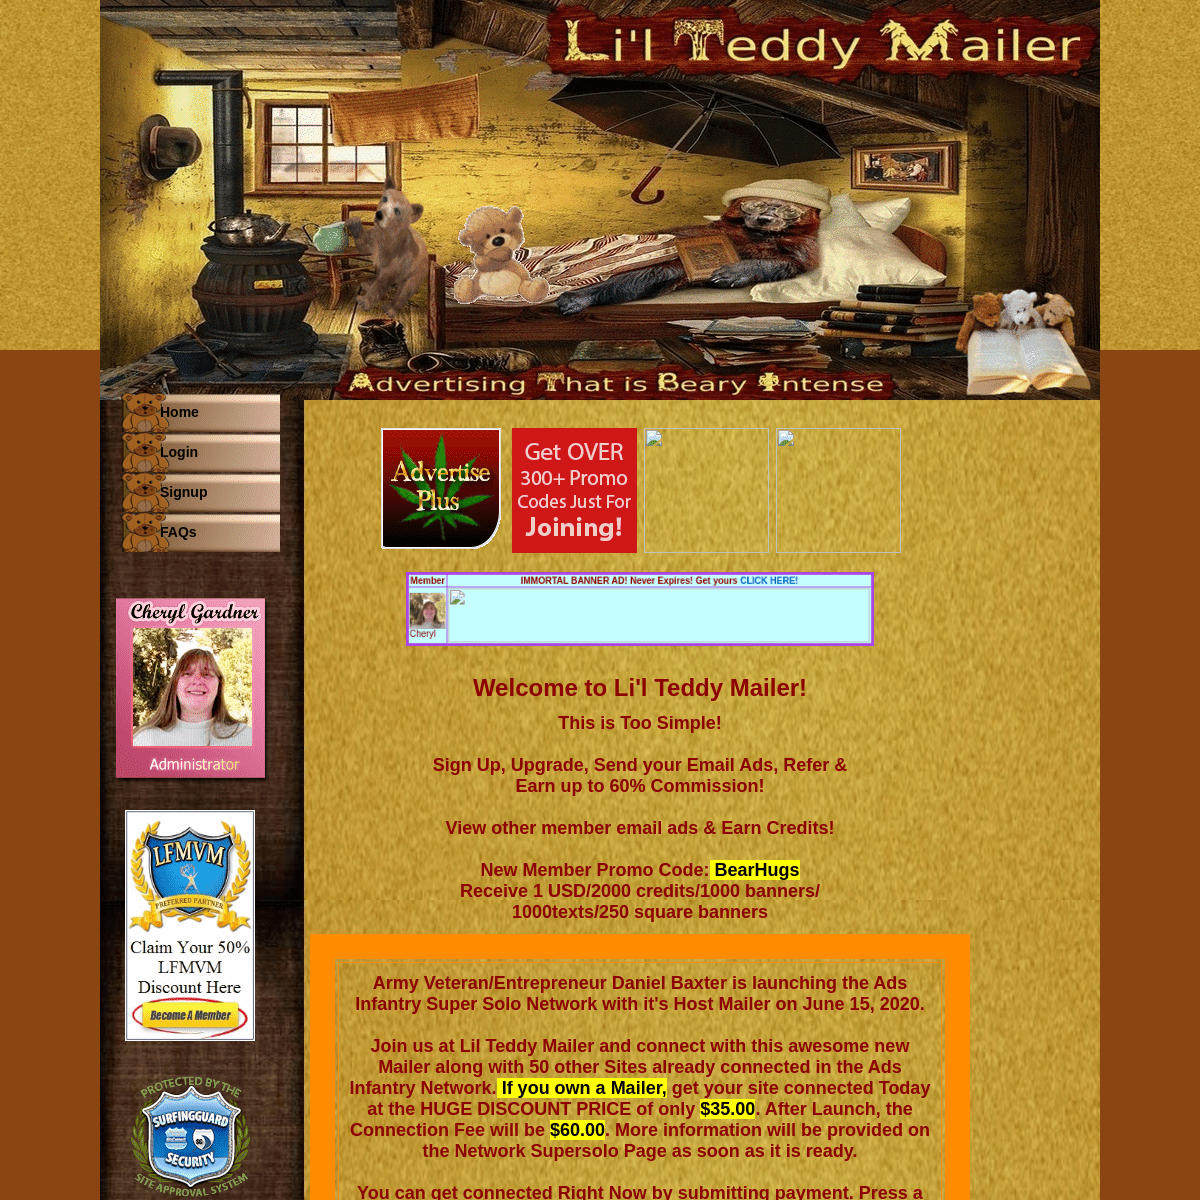 A complete backup of https://lilteddymailer.com